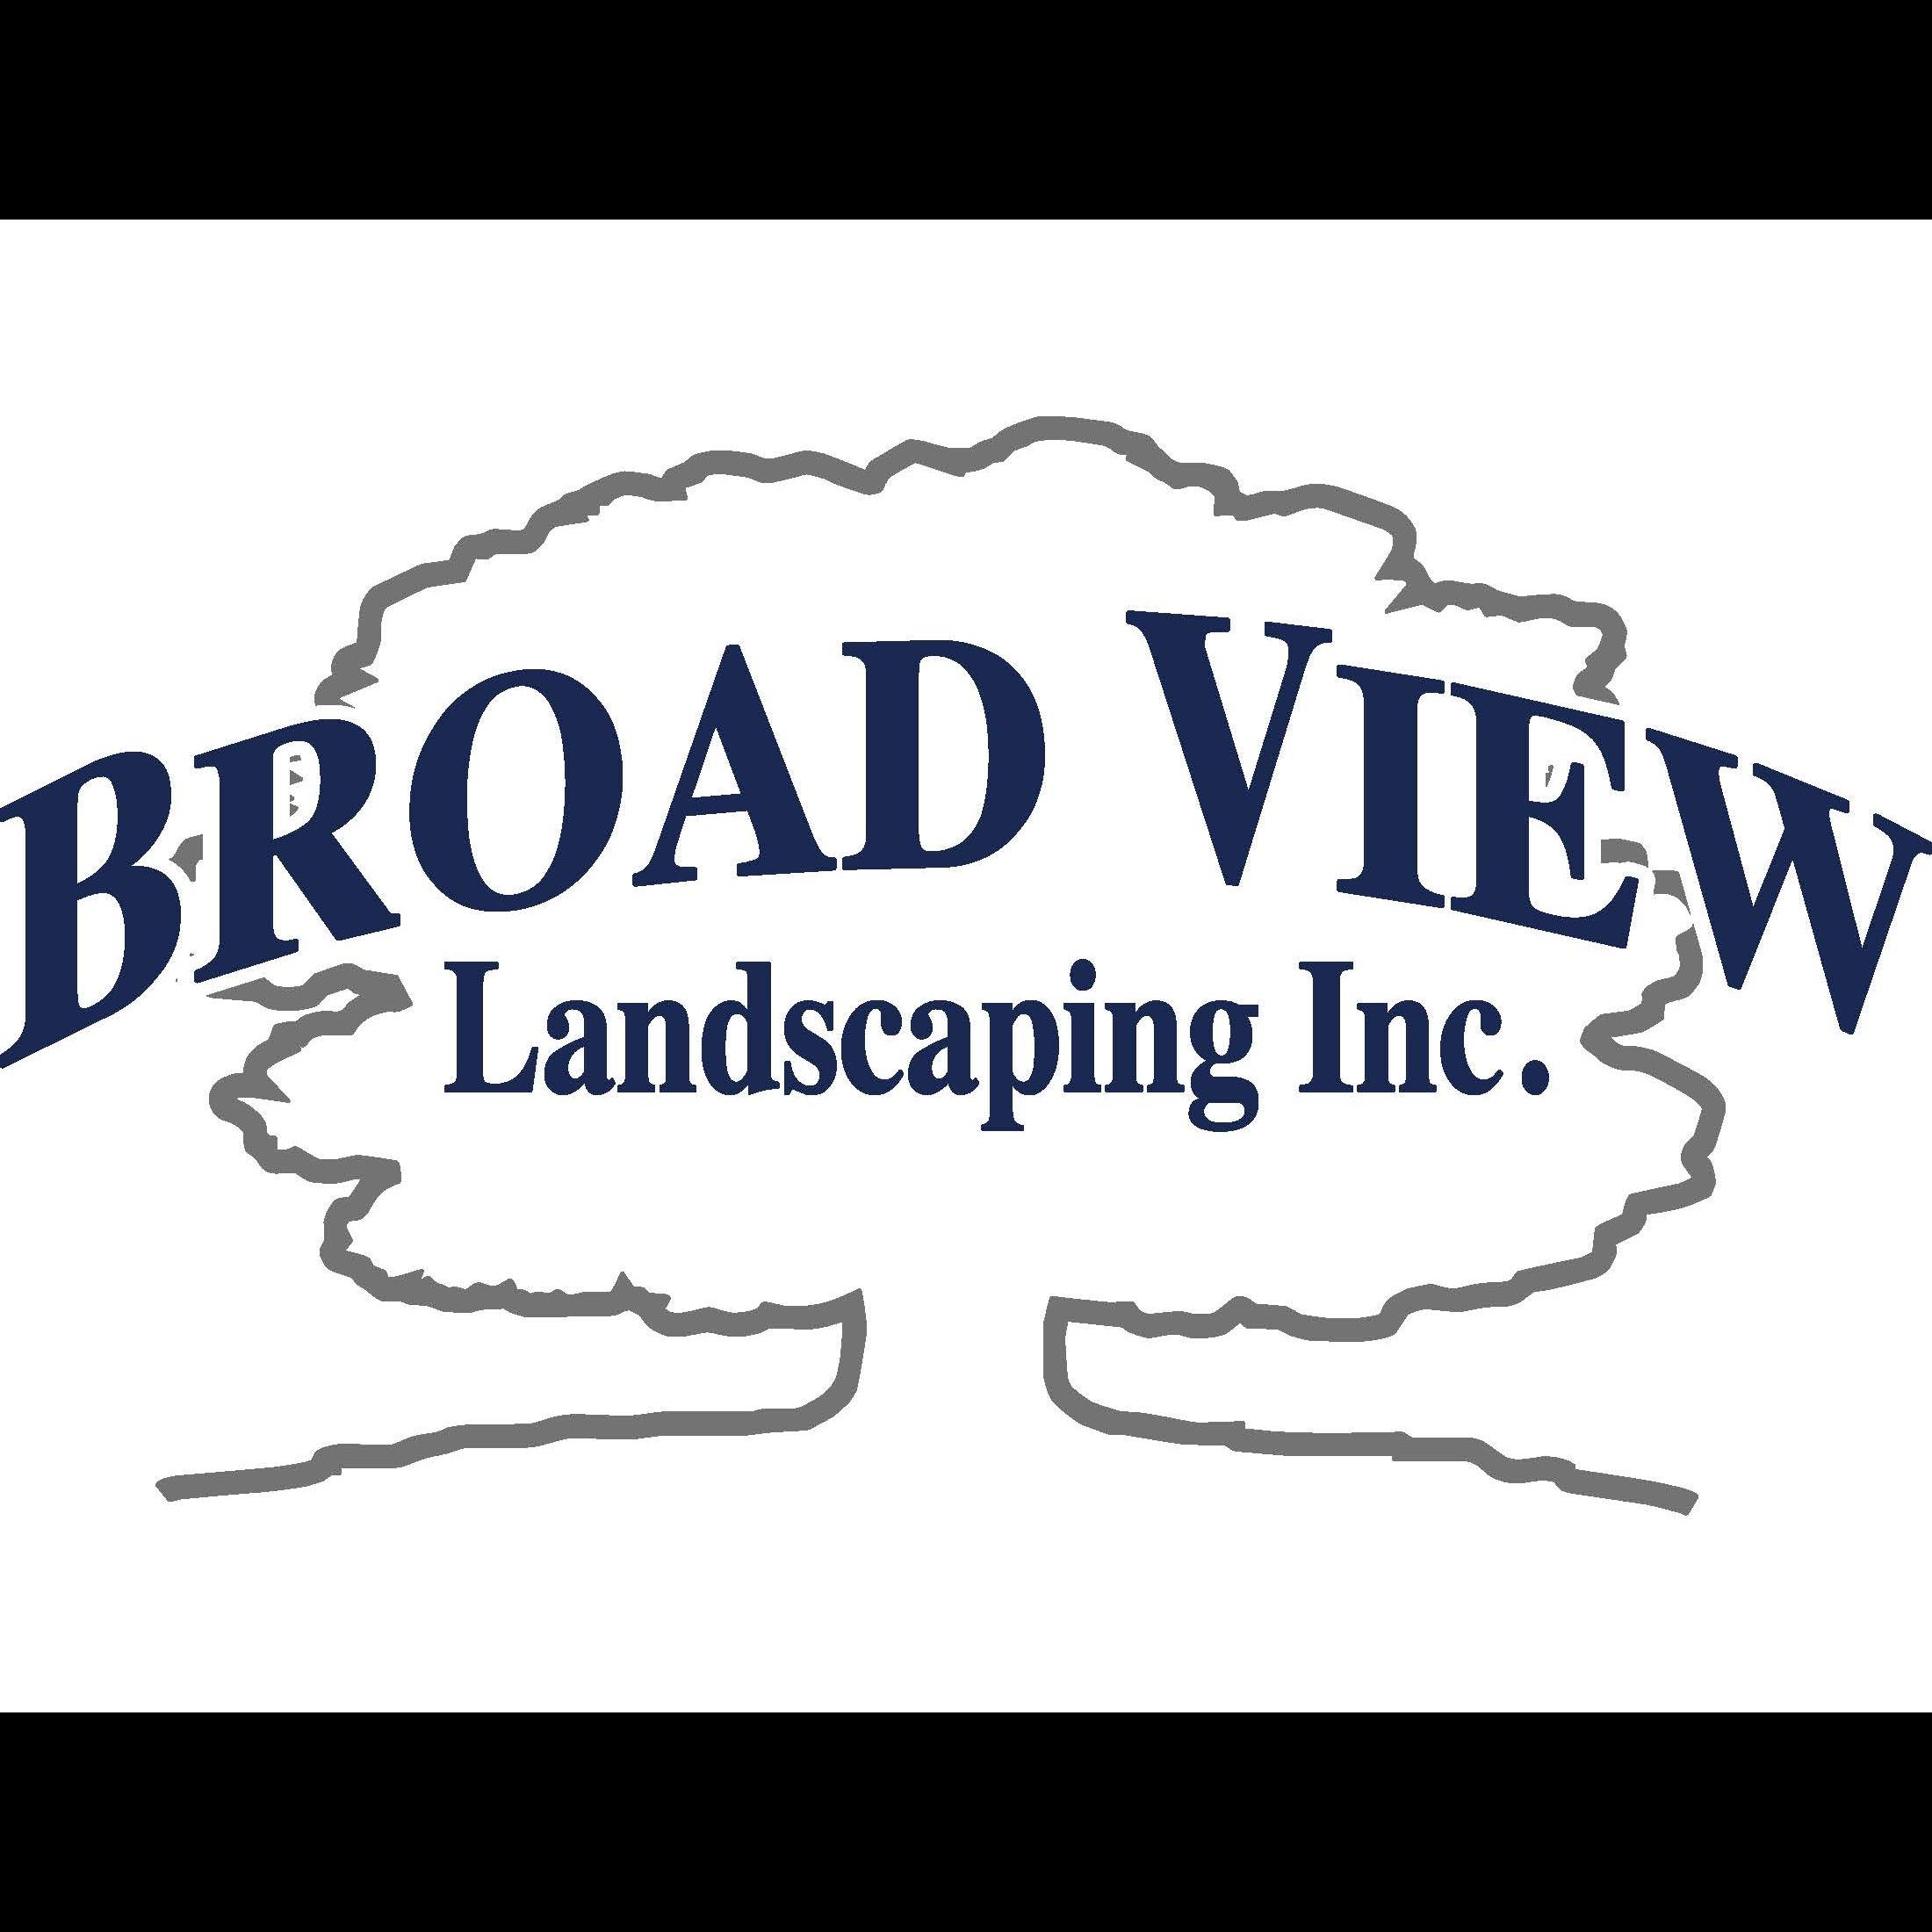 Broad View Landscaping, Inc.